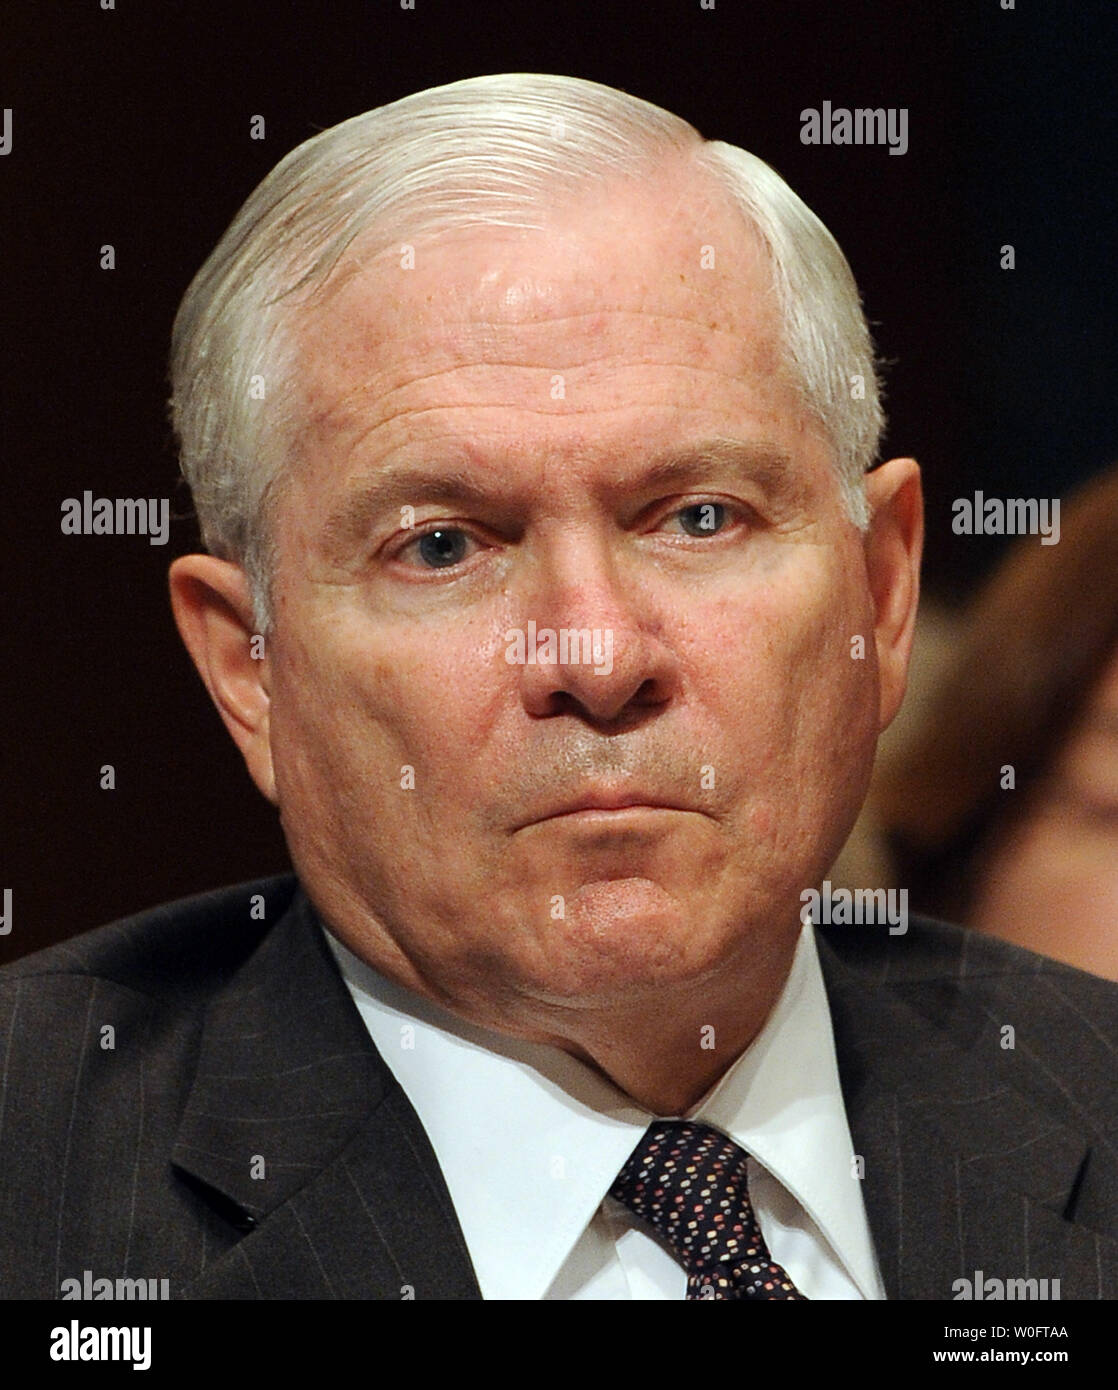 Secretary of Defense Robert Gates testifies before the Senate Armed Services Committee regarding the new Strategic Arms Reduction Treaty (START) with Russia, aimed at reducing strategic nuclear arms, on Capitol Hill in Washington on June 17, 2010.    UPI/Roger L. Wollenberg Stock Photo